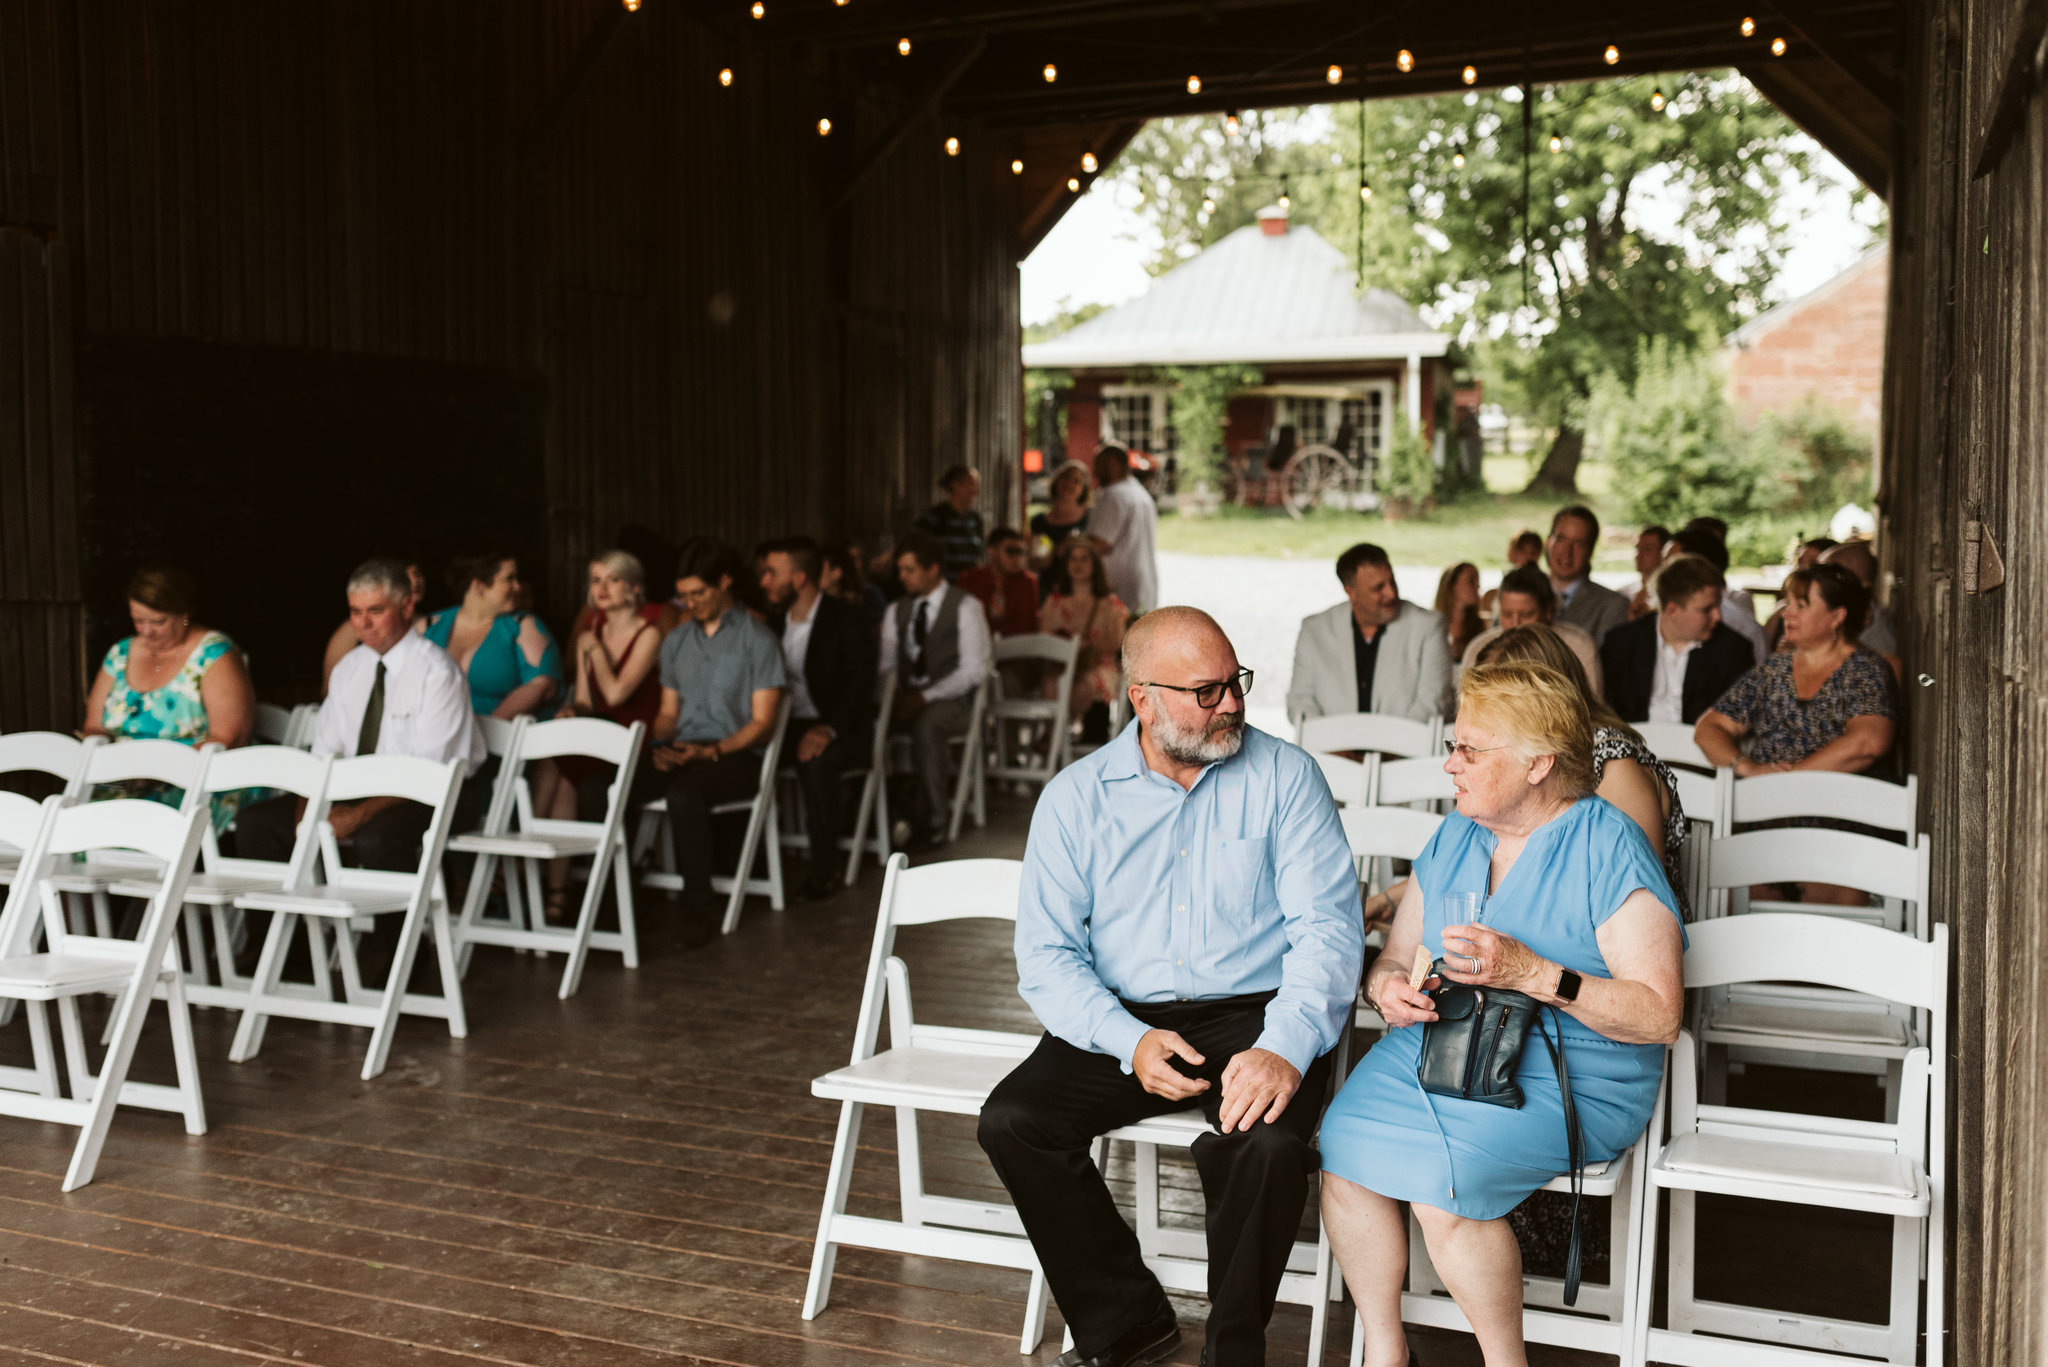 Rocklands Farm, Maryland, Intimate Wedding, Baltimore Wedding Photographer, Sungold Flower Co, Rustic, Romantic, Barn Wedding, Wedding Guests Talking Before Ceremony Begins